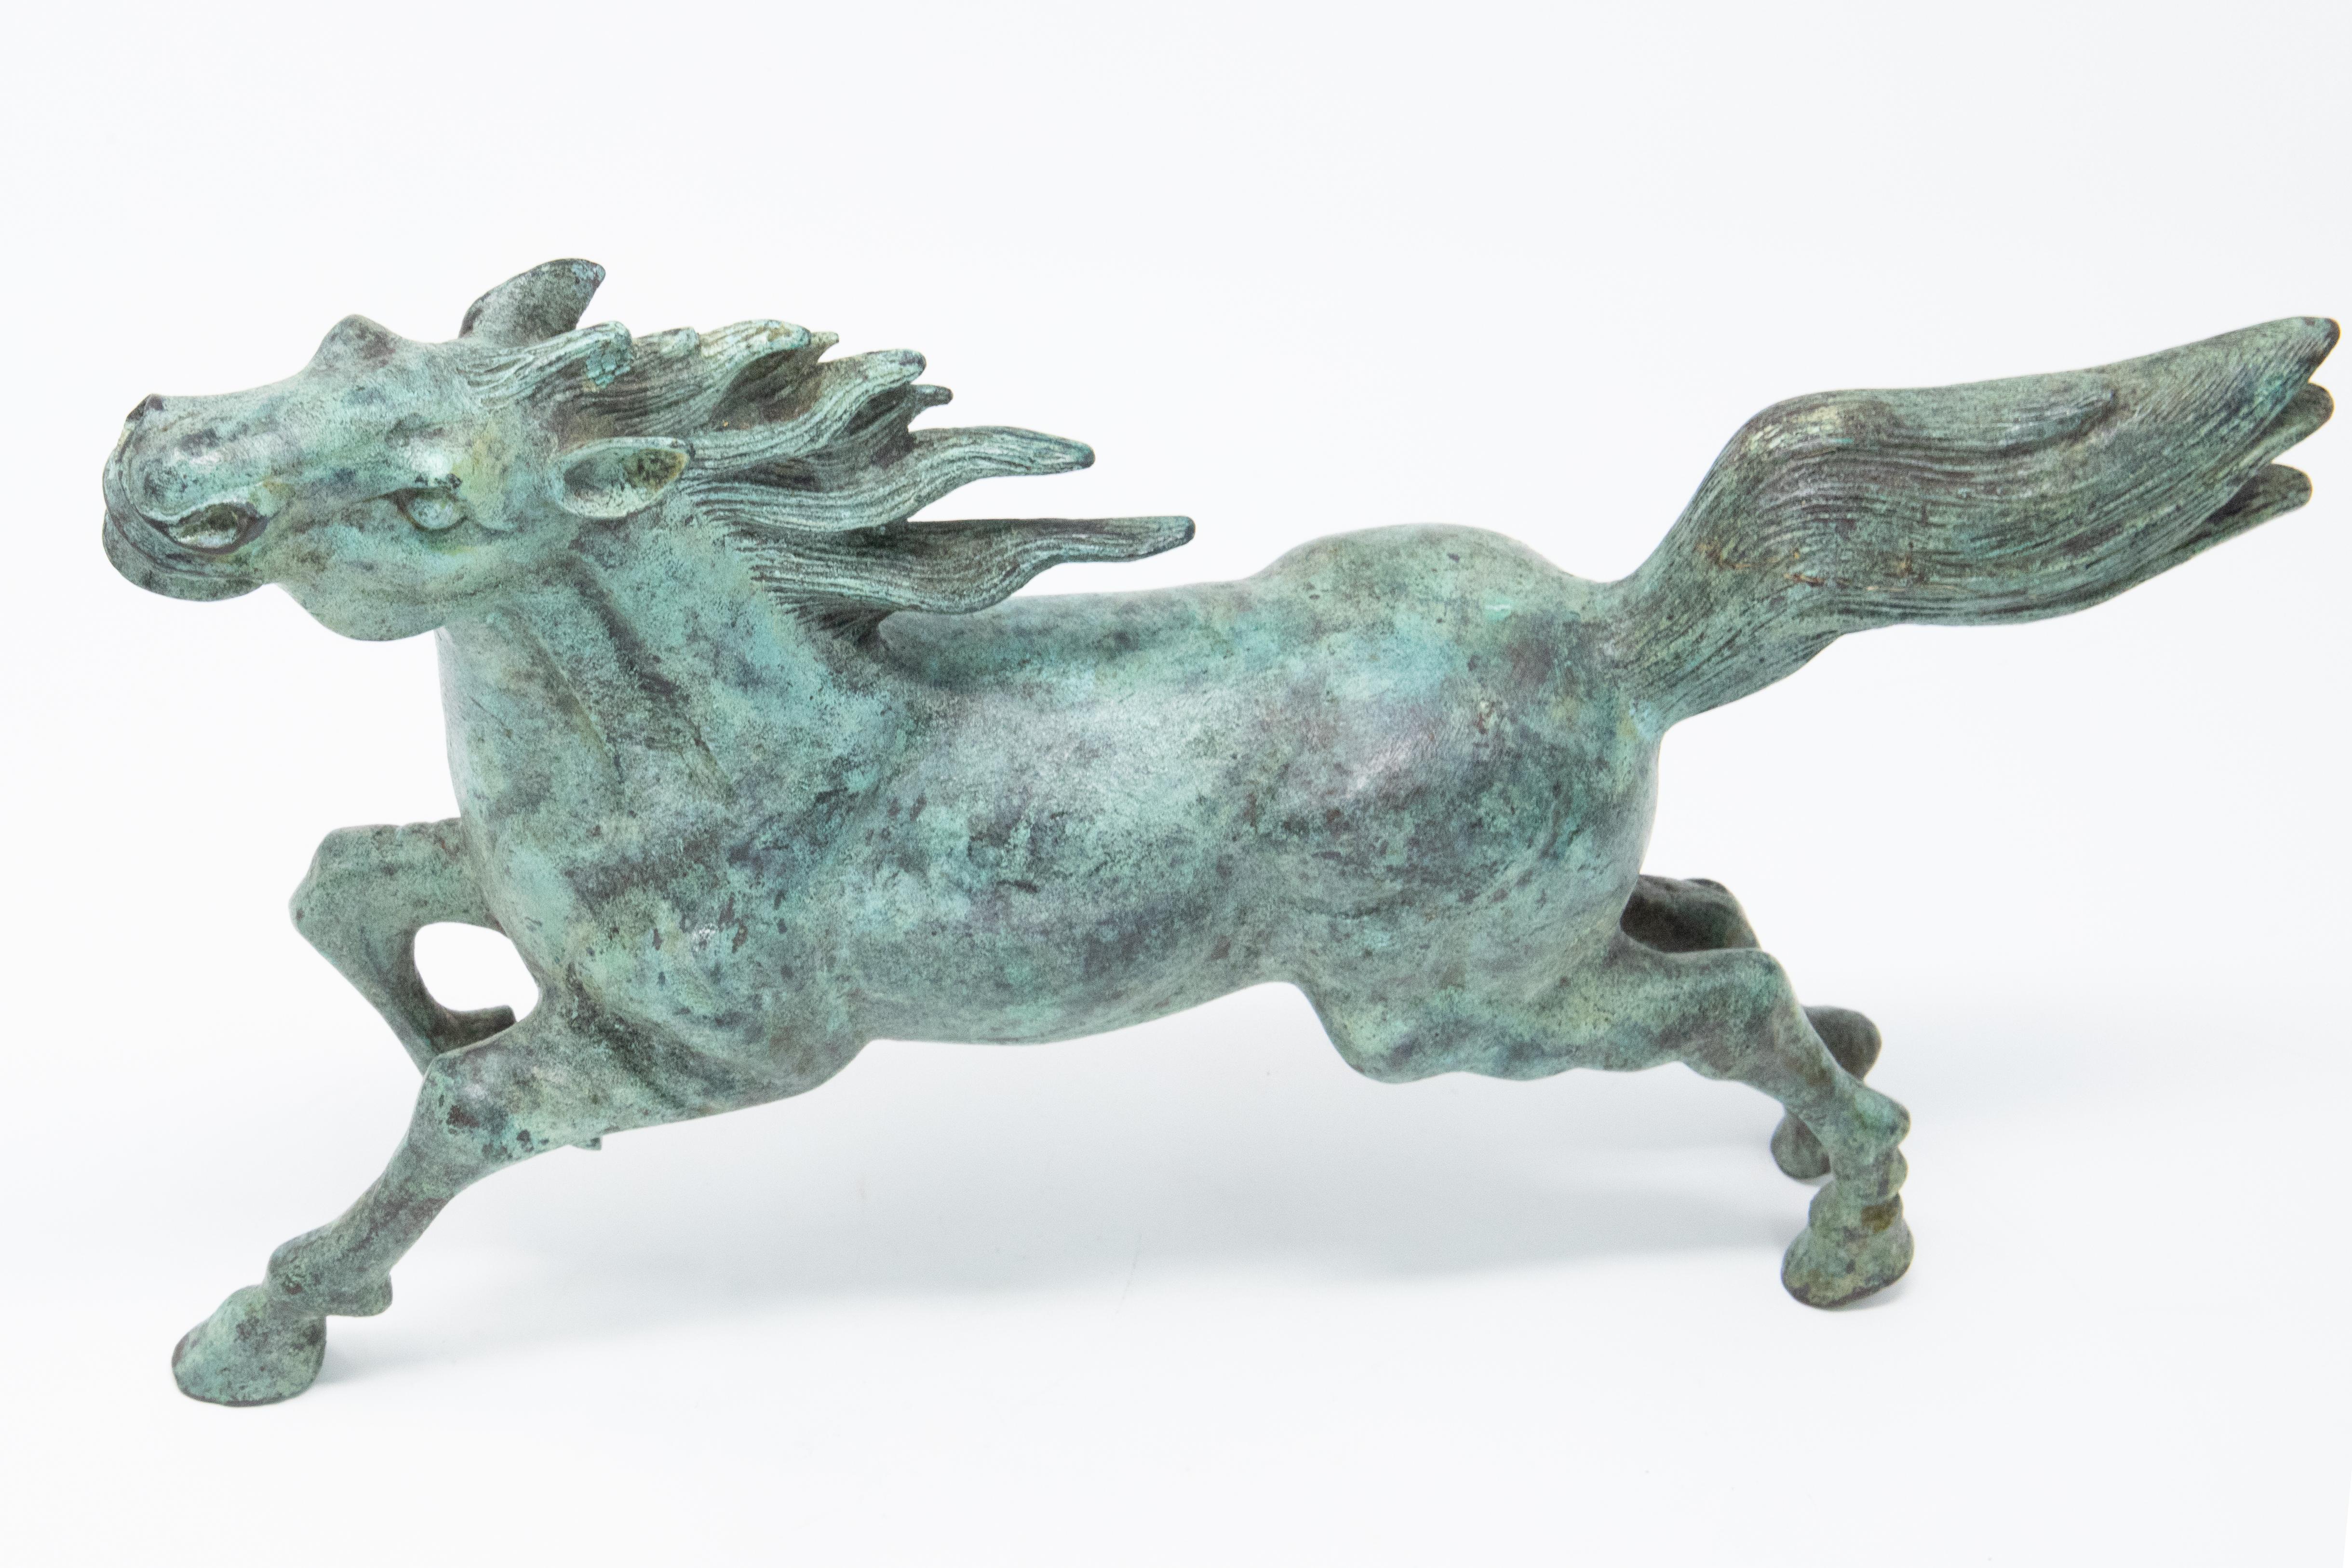 A stunning bronze horse figure showcases a beautiful patina. The figure depicts a horse in the midst of running with its tail and mane flying in the wind. The horse’s head is pointed up in the air and its right front leg is lifted. The piece is